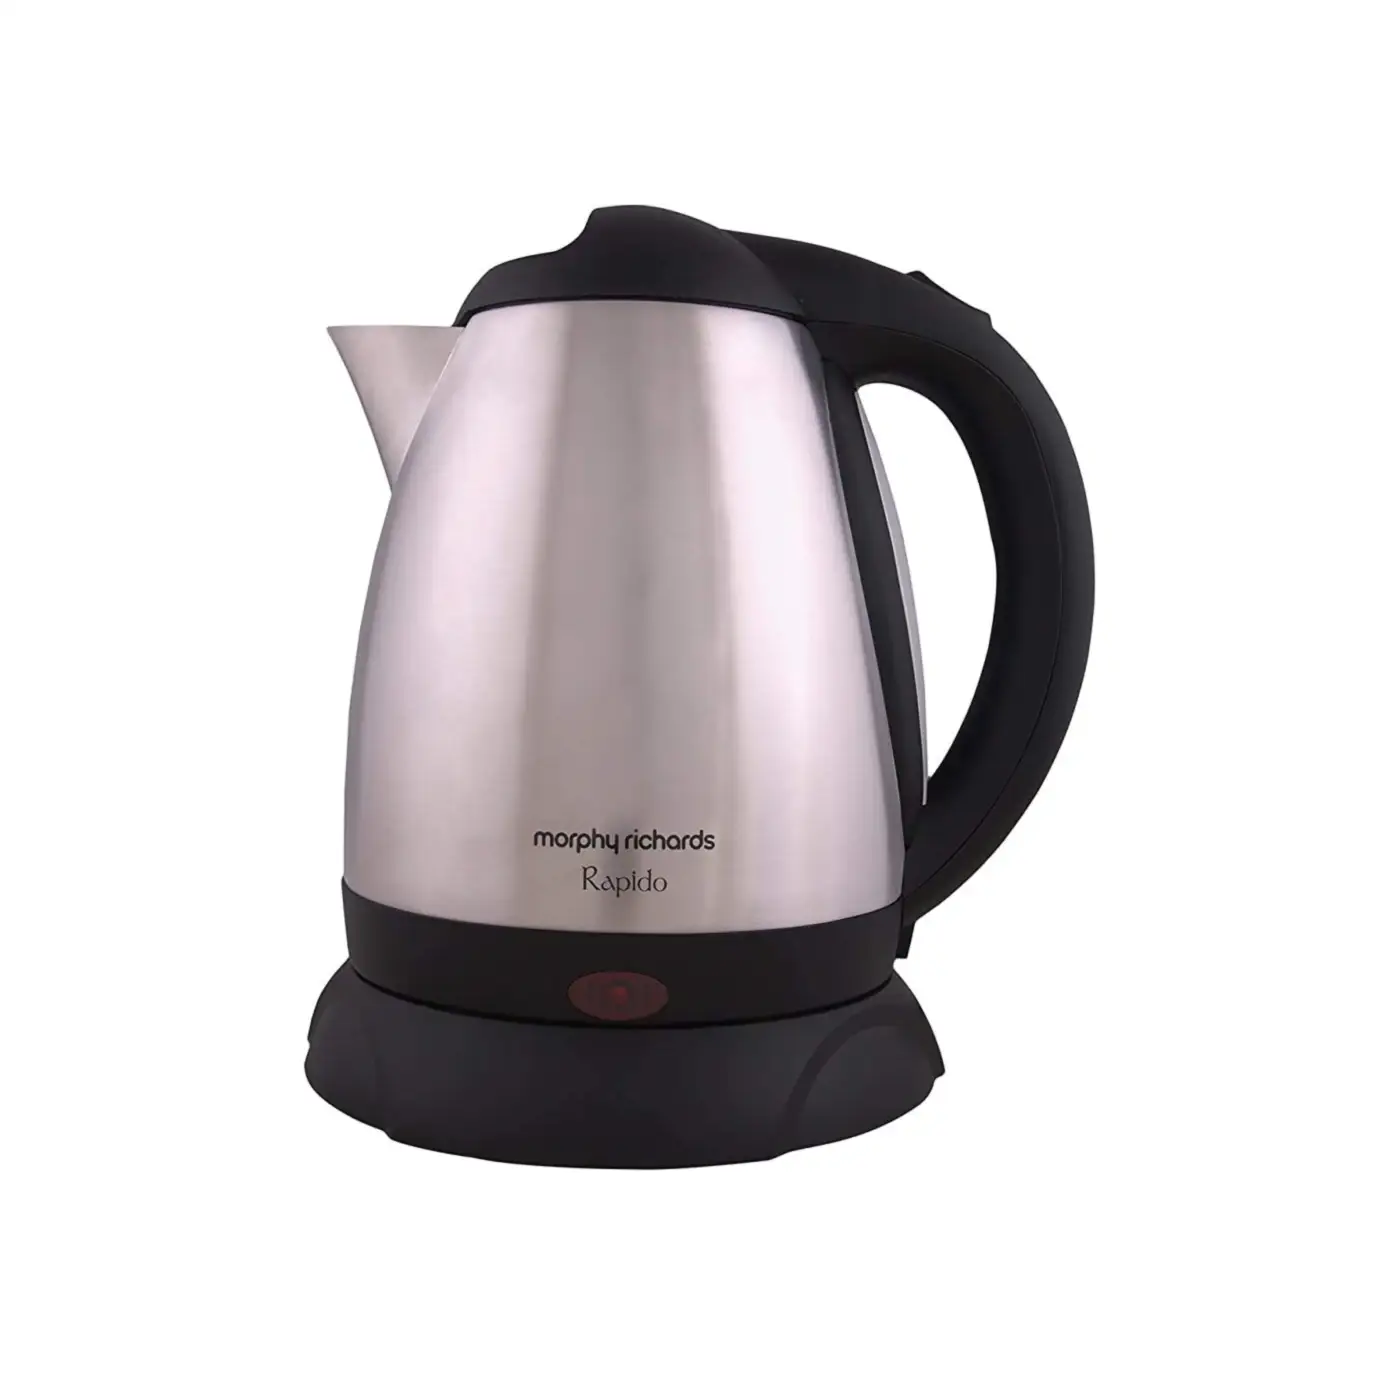 Morphy Richards Rapido 1.8-Litre Stainless Steel Electric Kettle